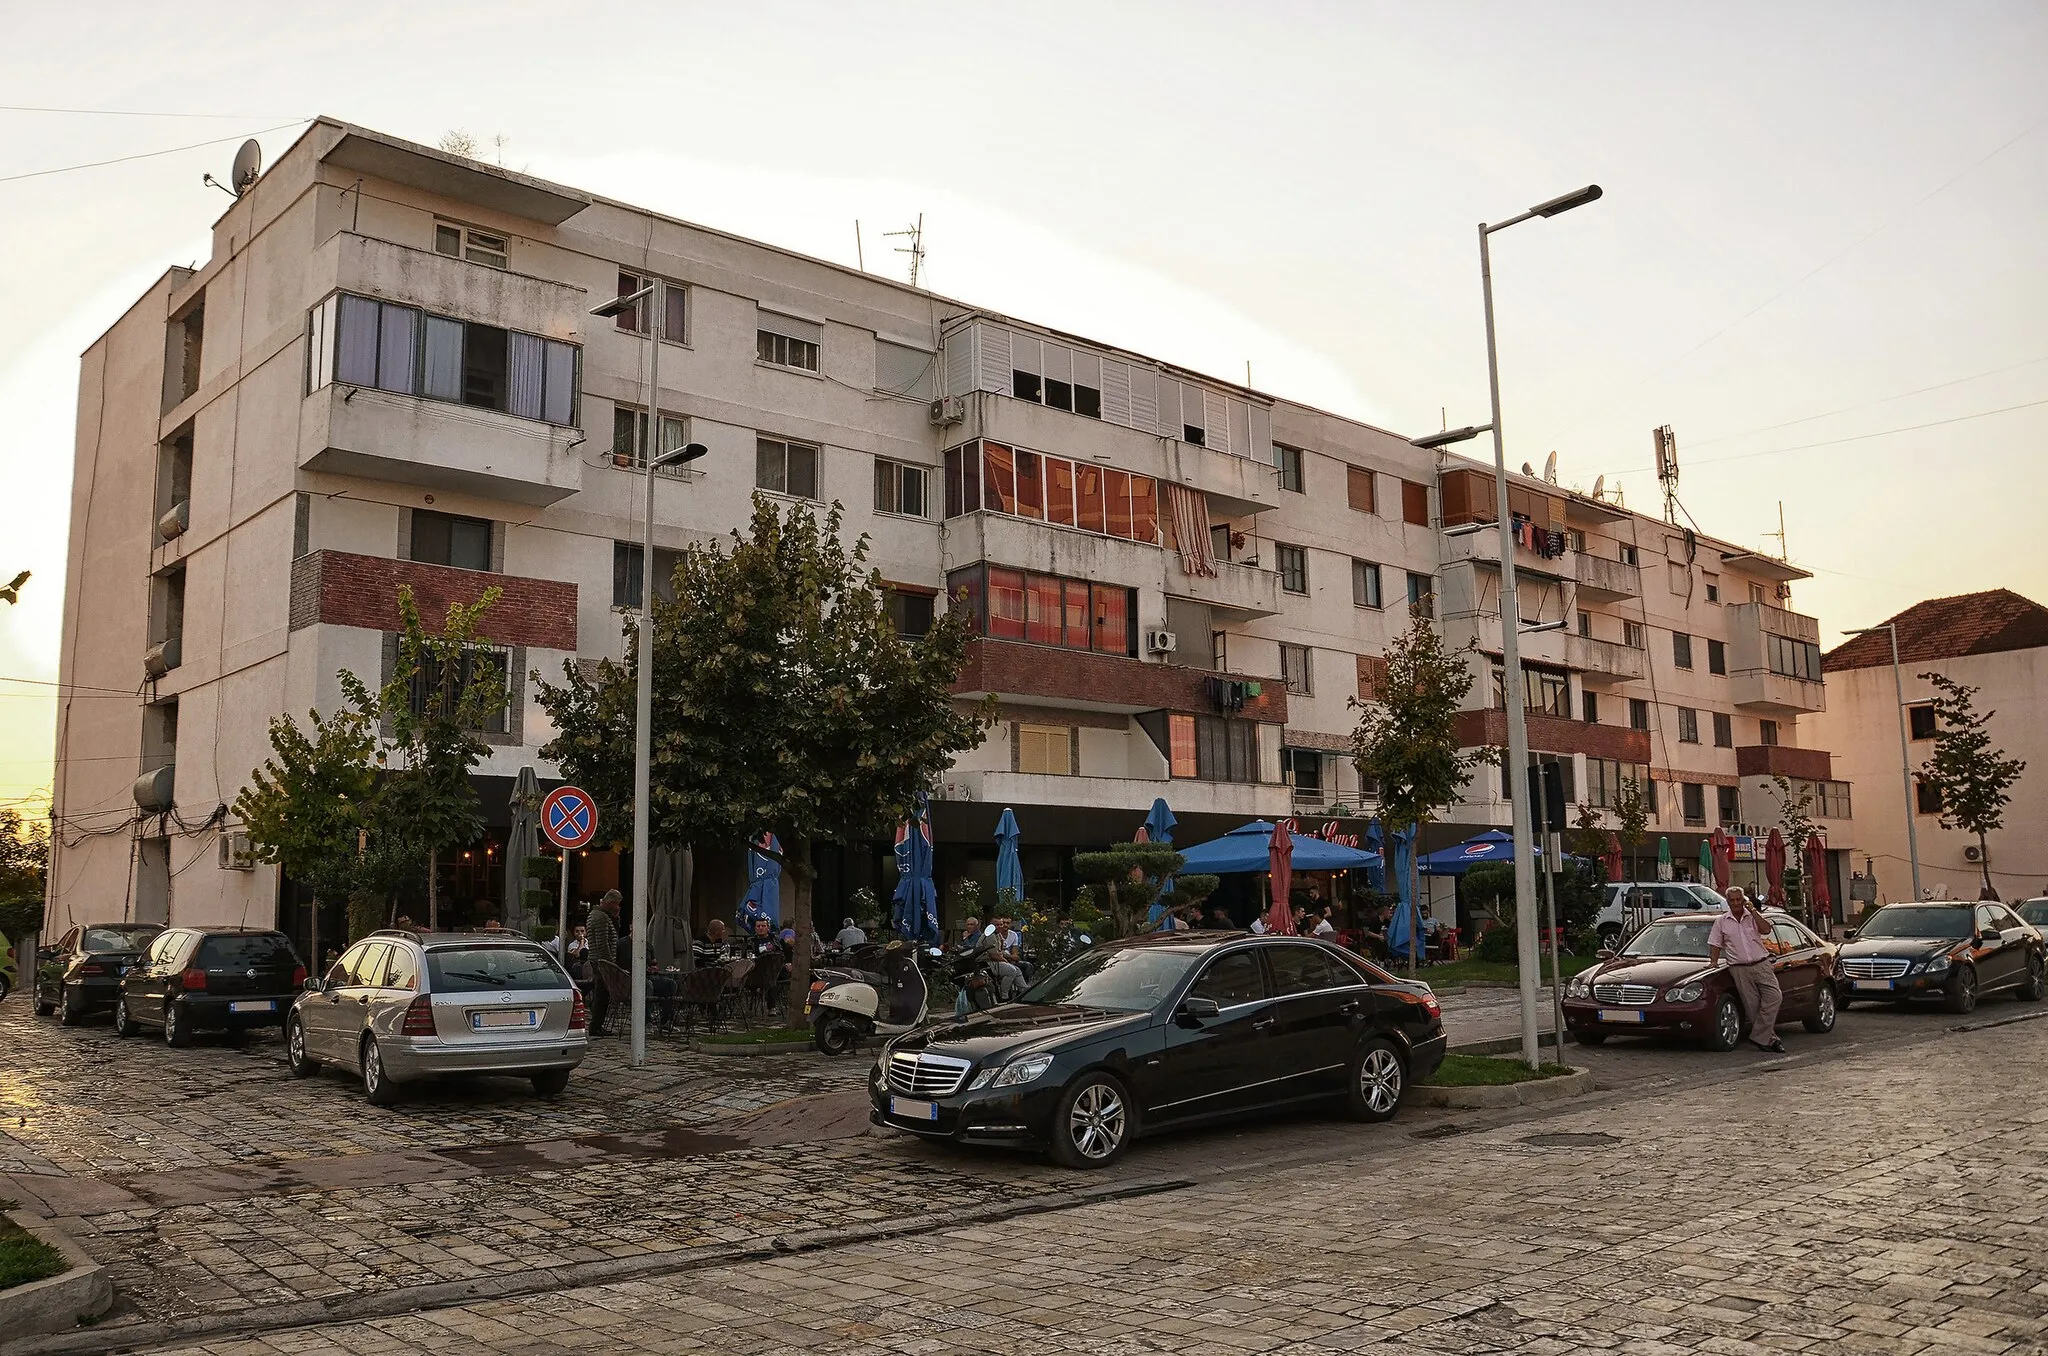 Photo showing: The main street of Koplik, Albania, with apartment buildings